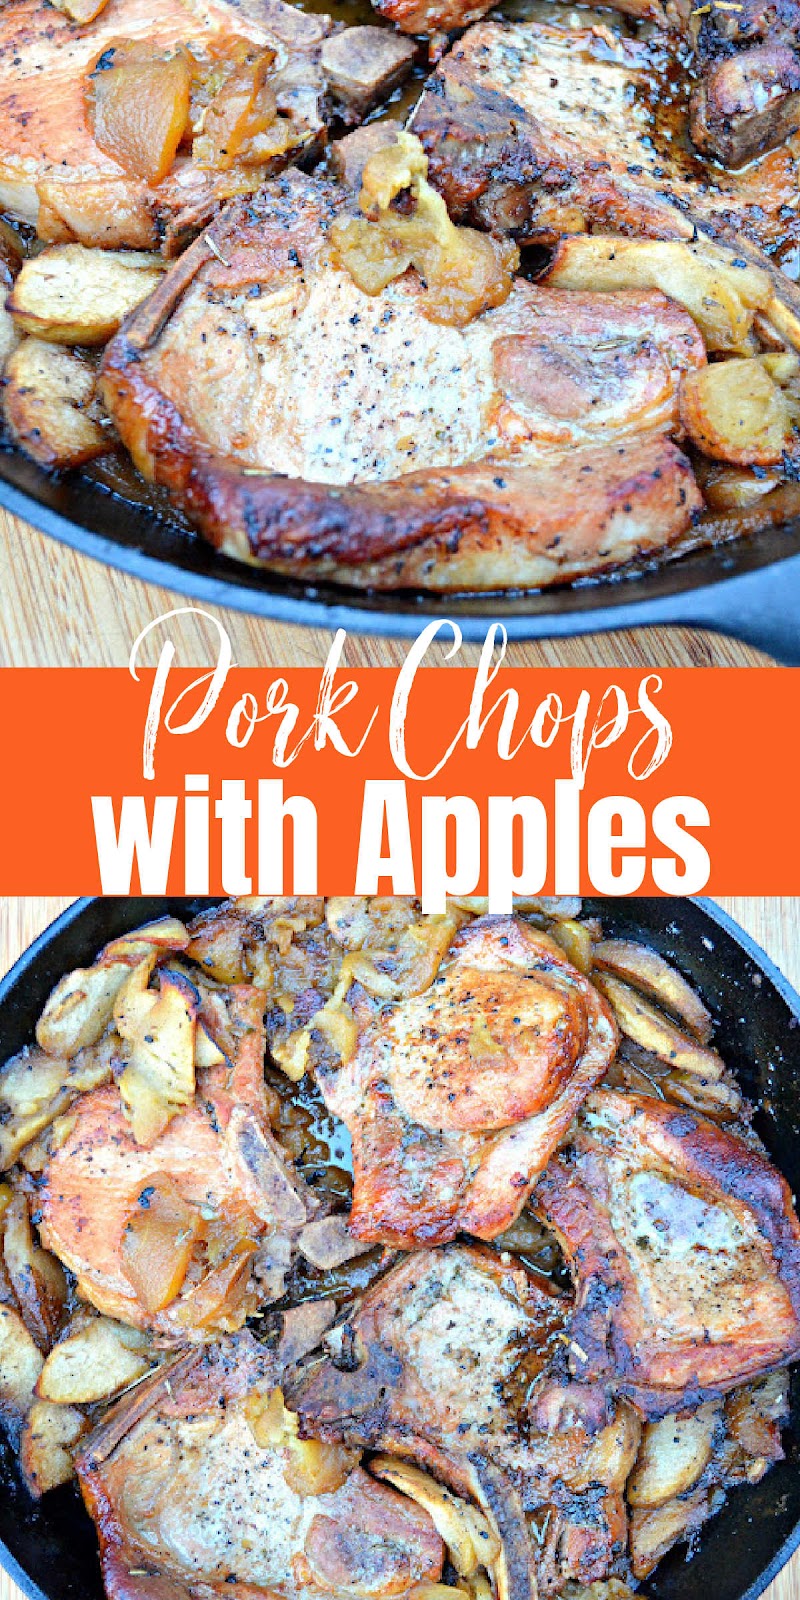 Pork Chops with Apples. 2 photos of the Pork Chops with Apples in a cast iron pan. There is an orange banner between the two photos with white text Pork Chops with Apples.